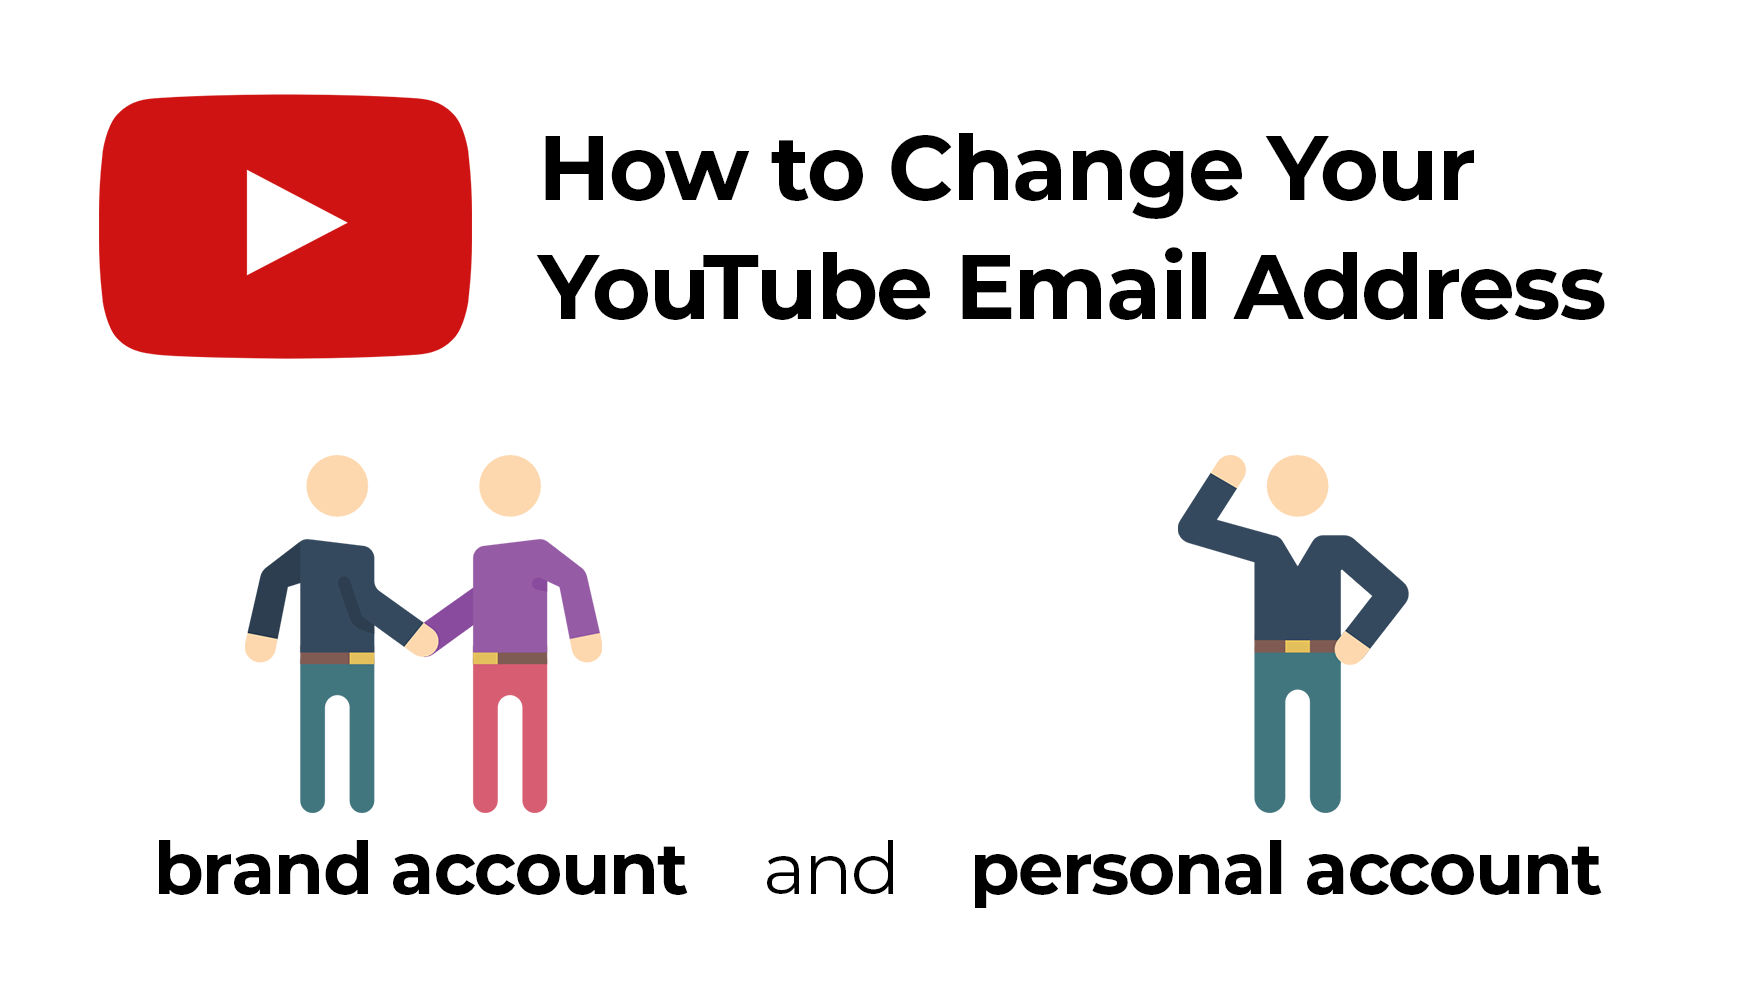 Home to change your YouTube email address